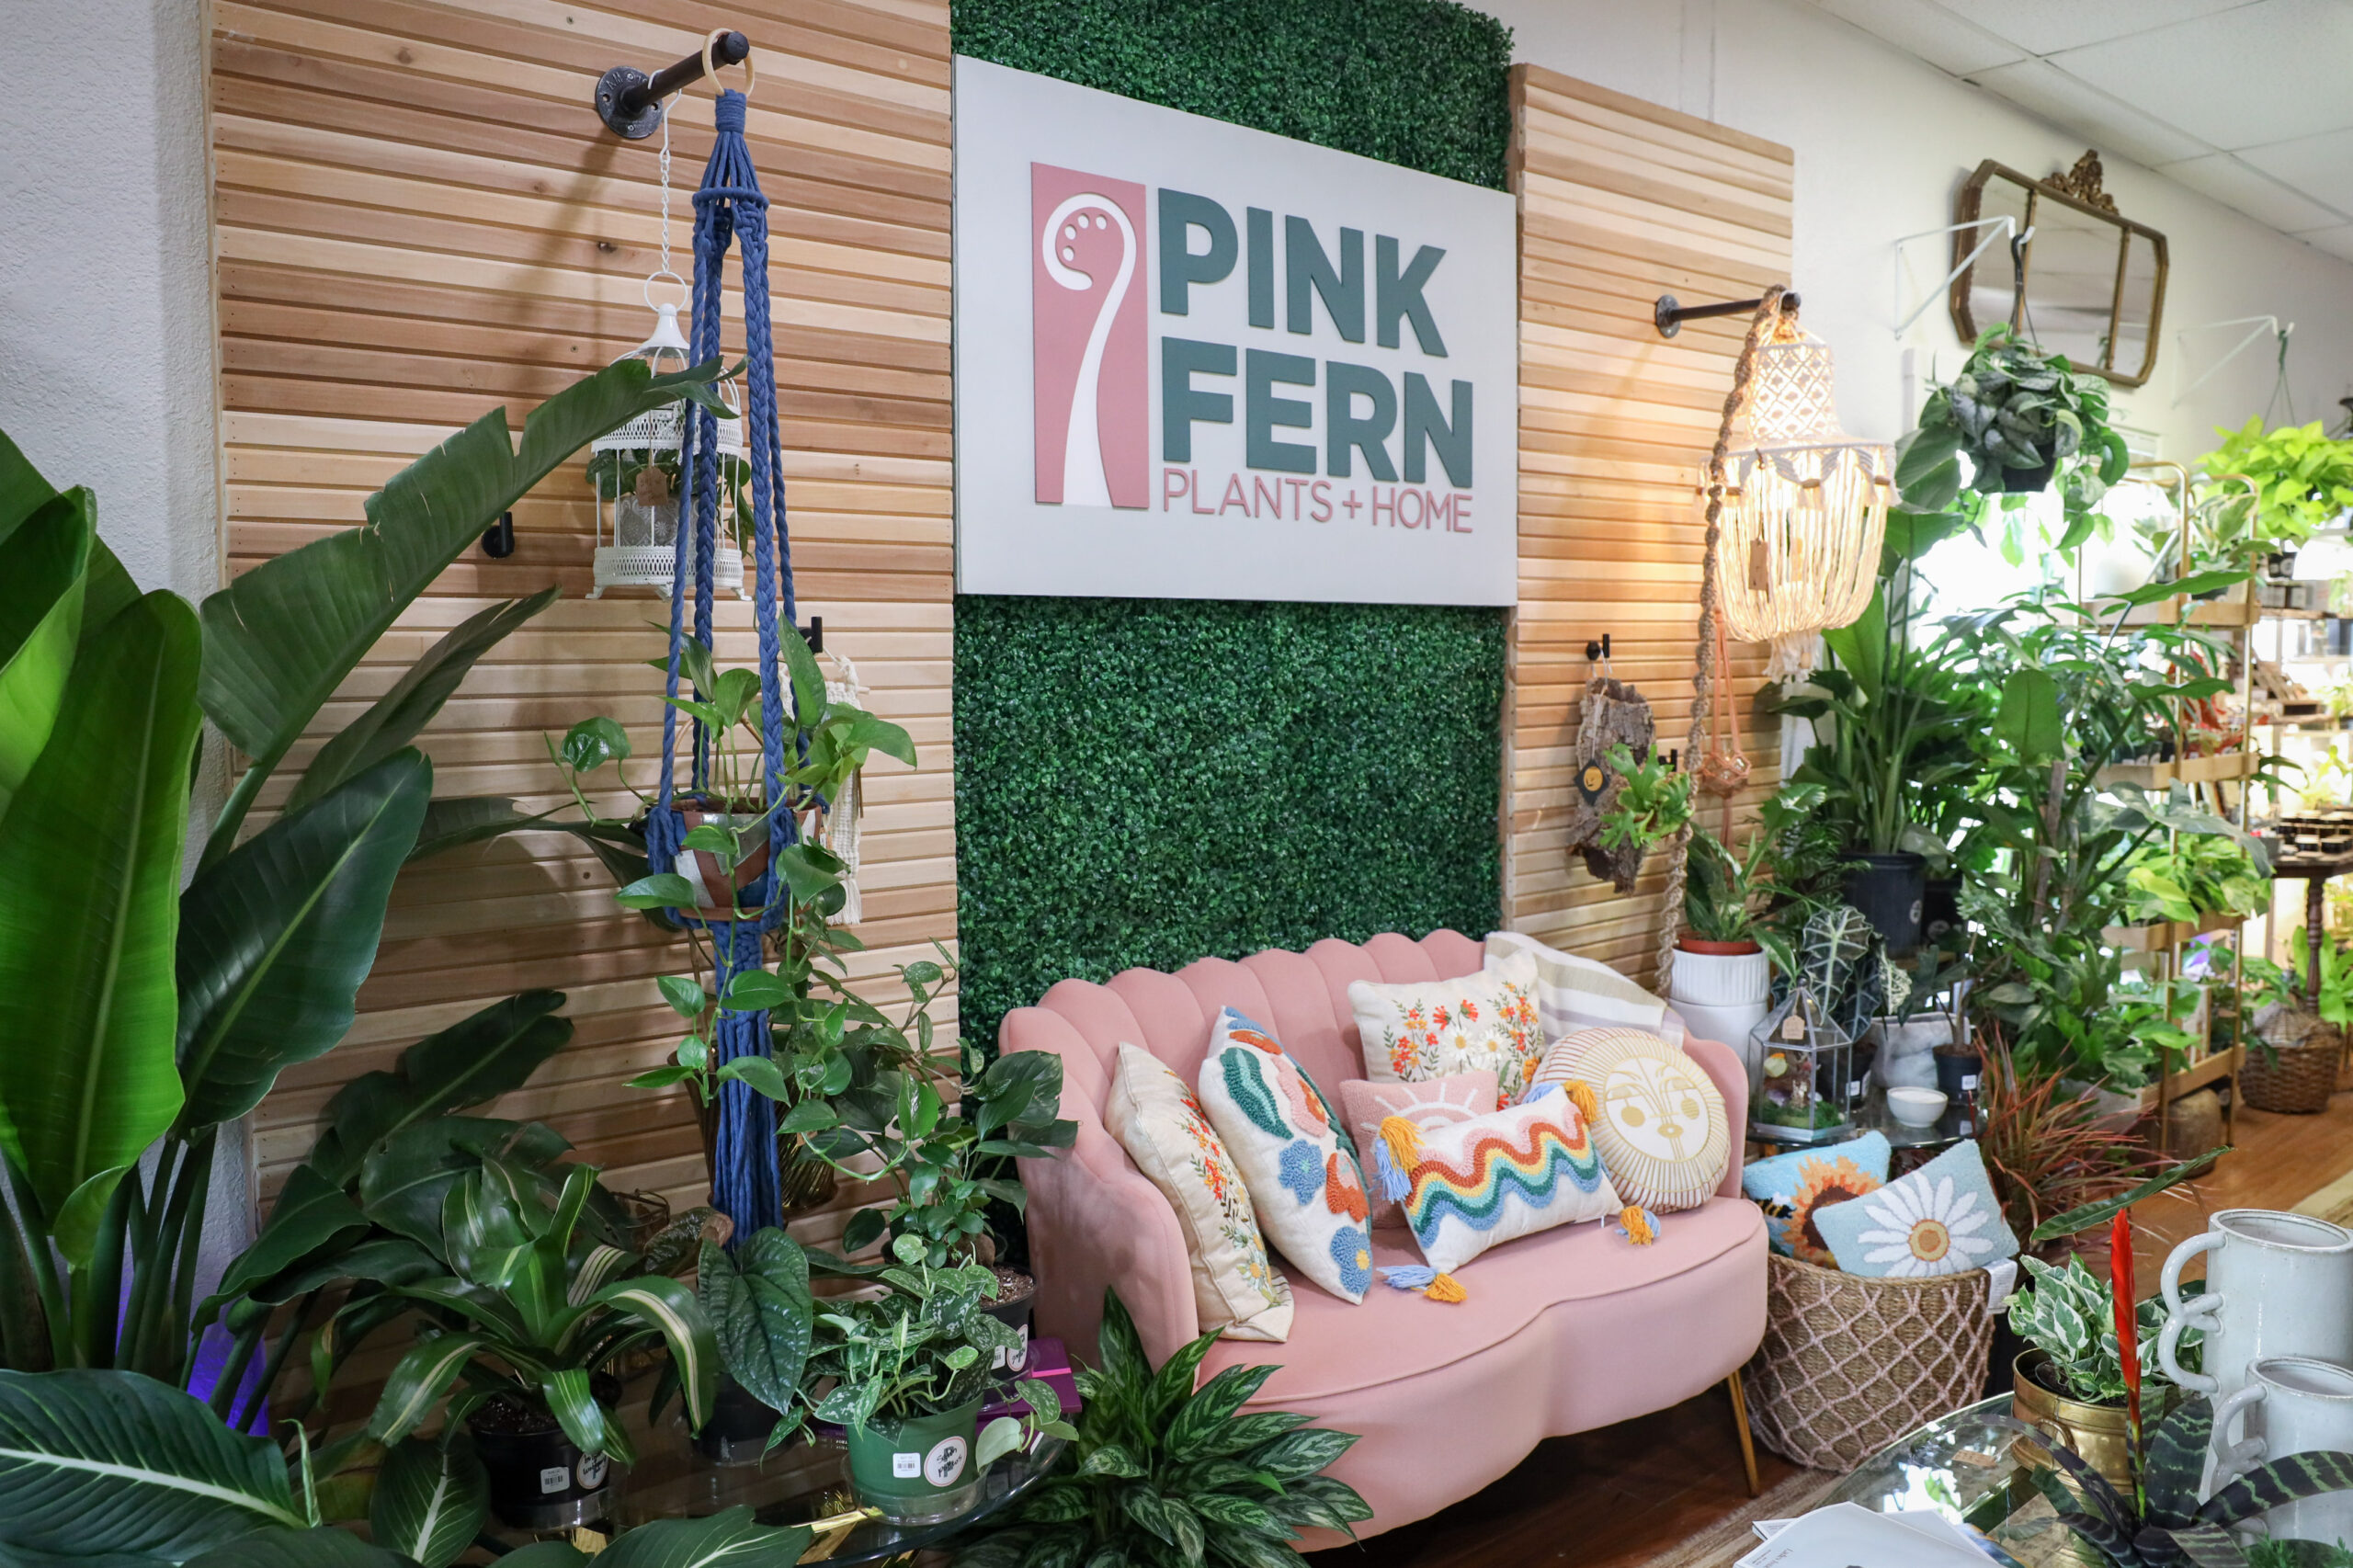 The Blossoming Entrepreneurial Journey of Lindsay Neely, founder of Pink Fern